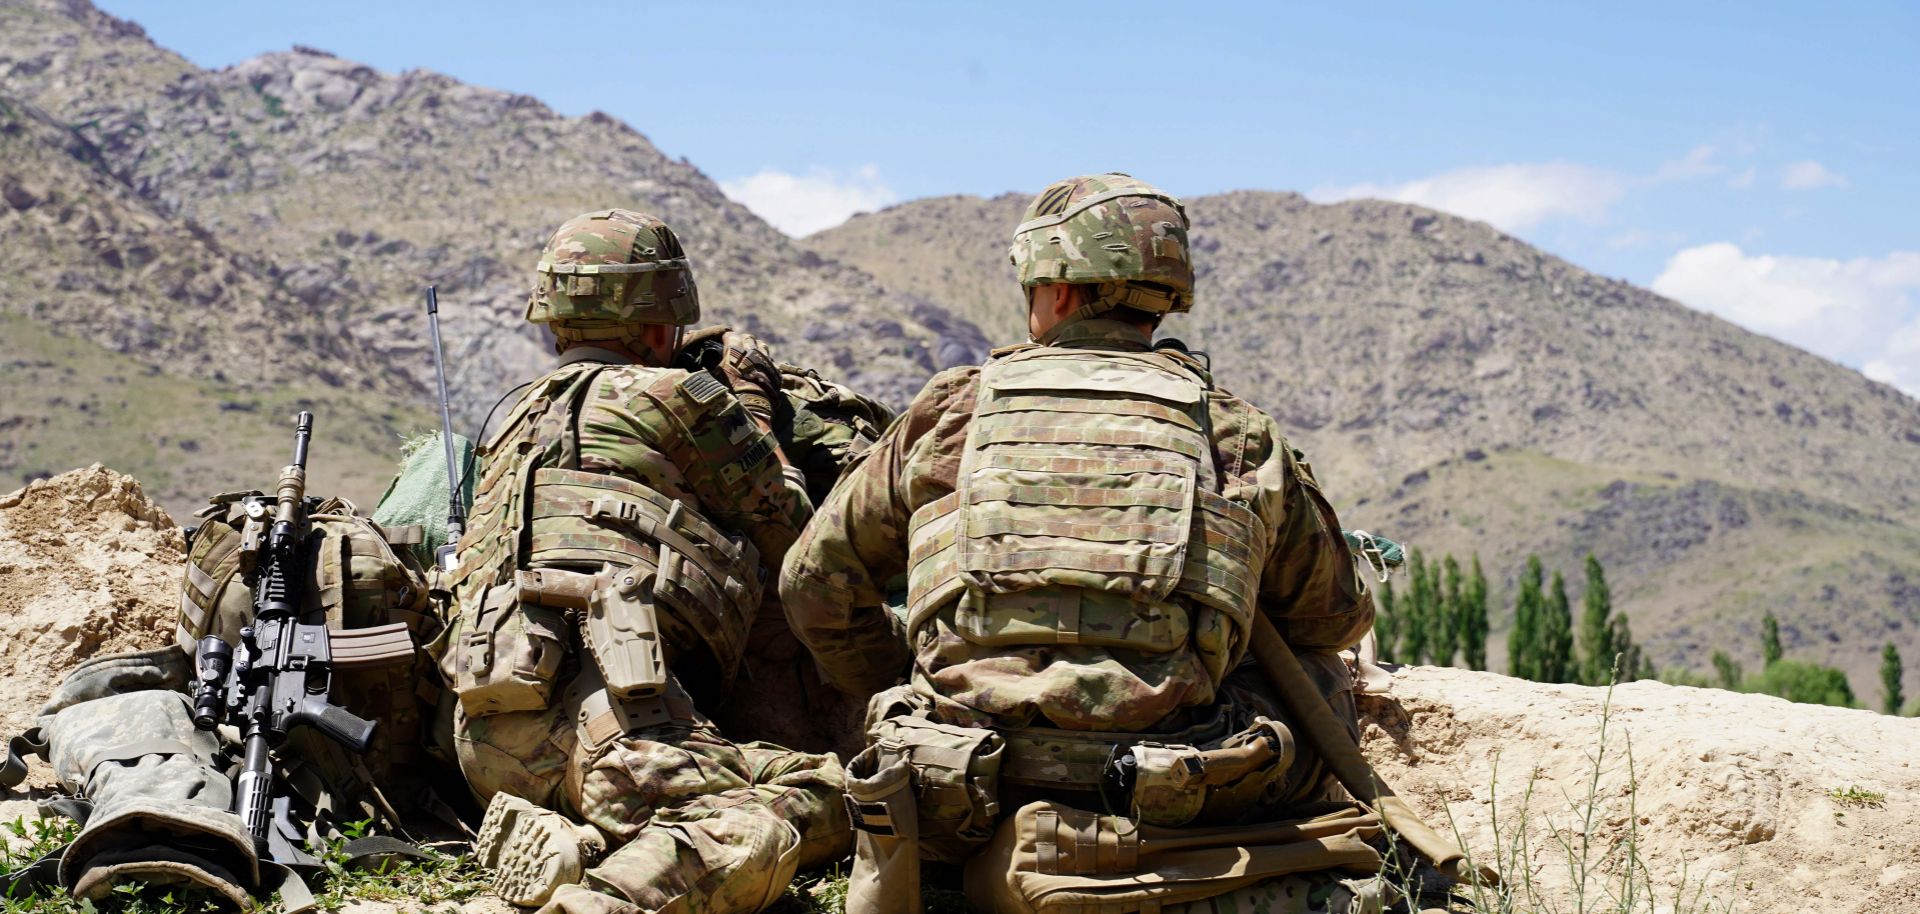 U.S. soldiers look out over the hillsides of an Afghan army checkpoint in Afghanistan's Wardak province on June 6, 2019.